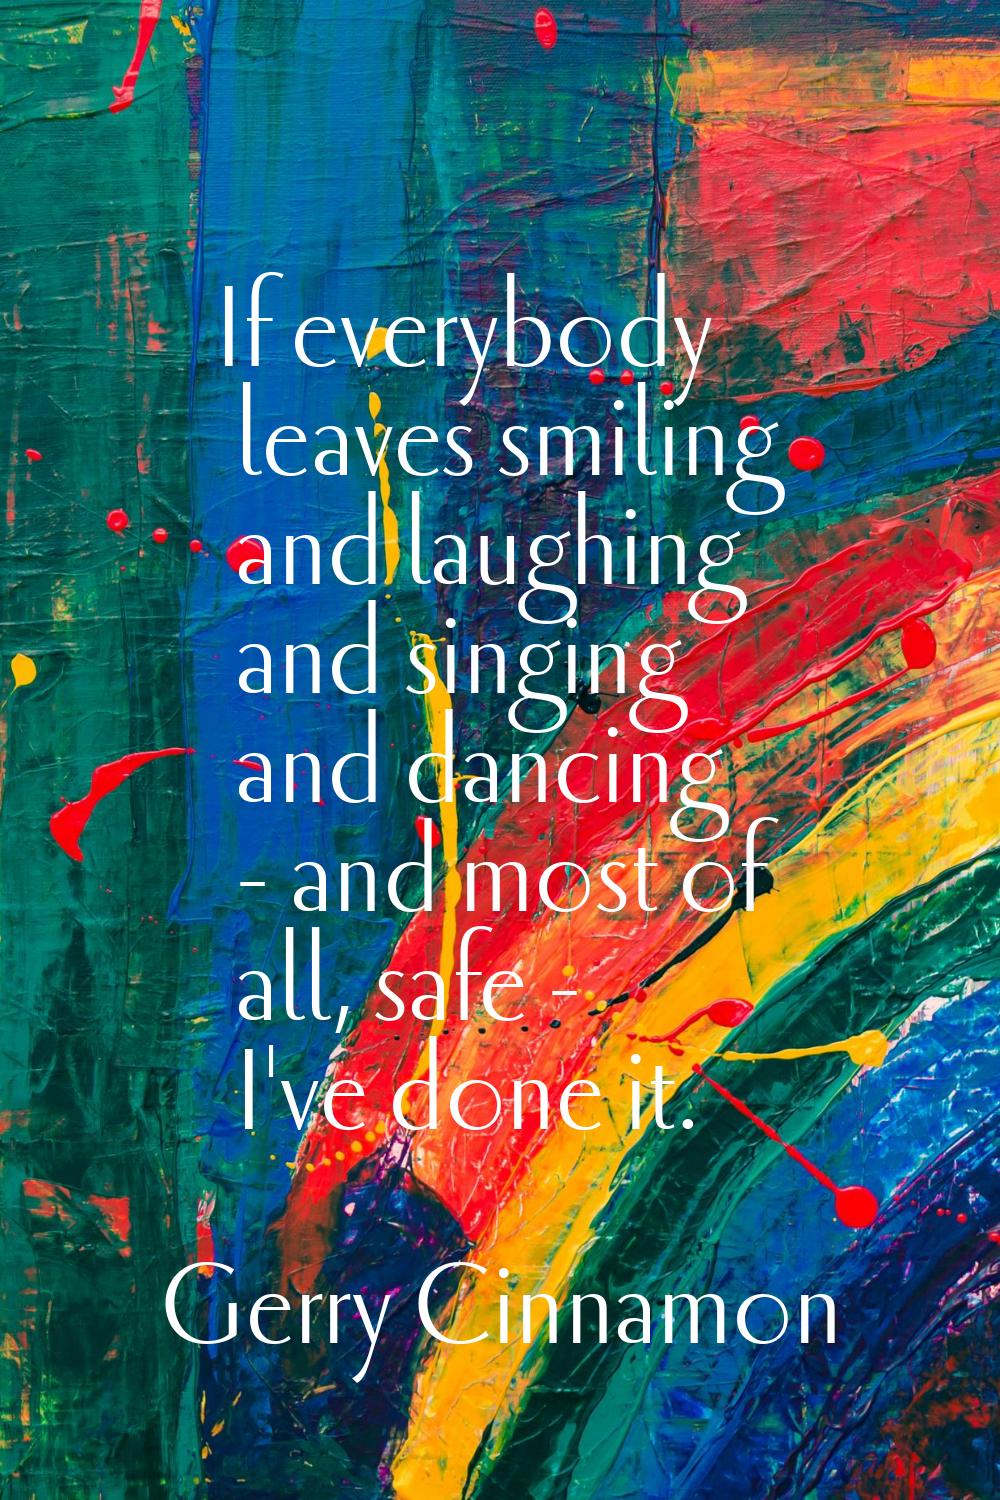 If everybody leaves smiling and laughing and singing and dancing - and most of all, safe - I've don